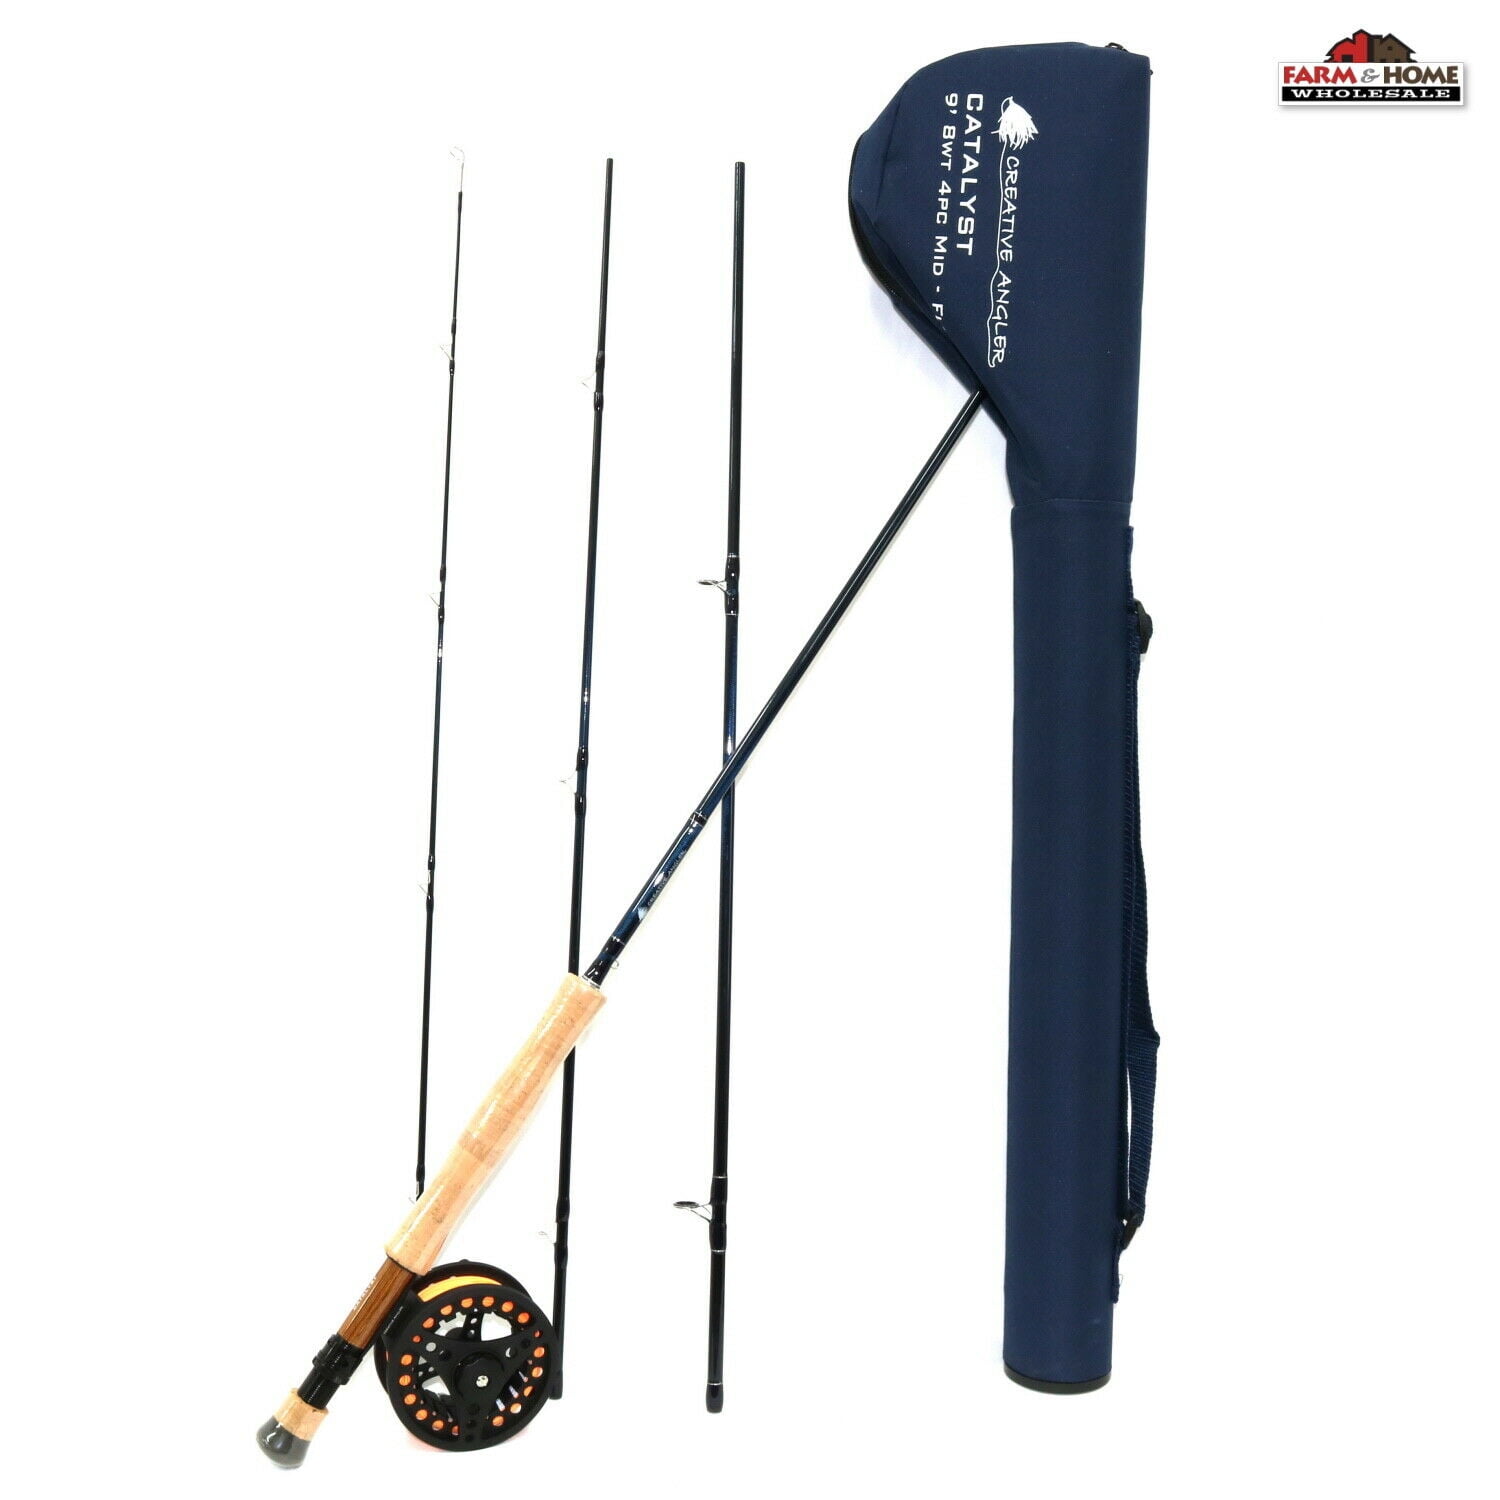 Creative Angler Convert Fly Rod and Spin Casting Rod. Convert Rod is Easily